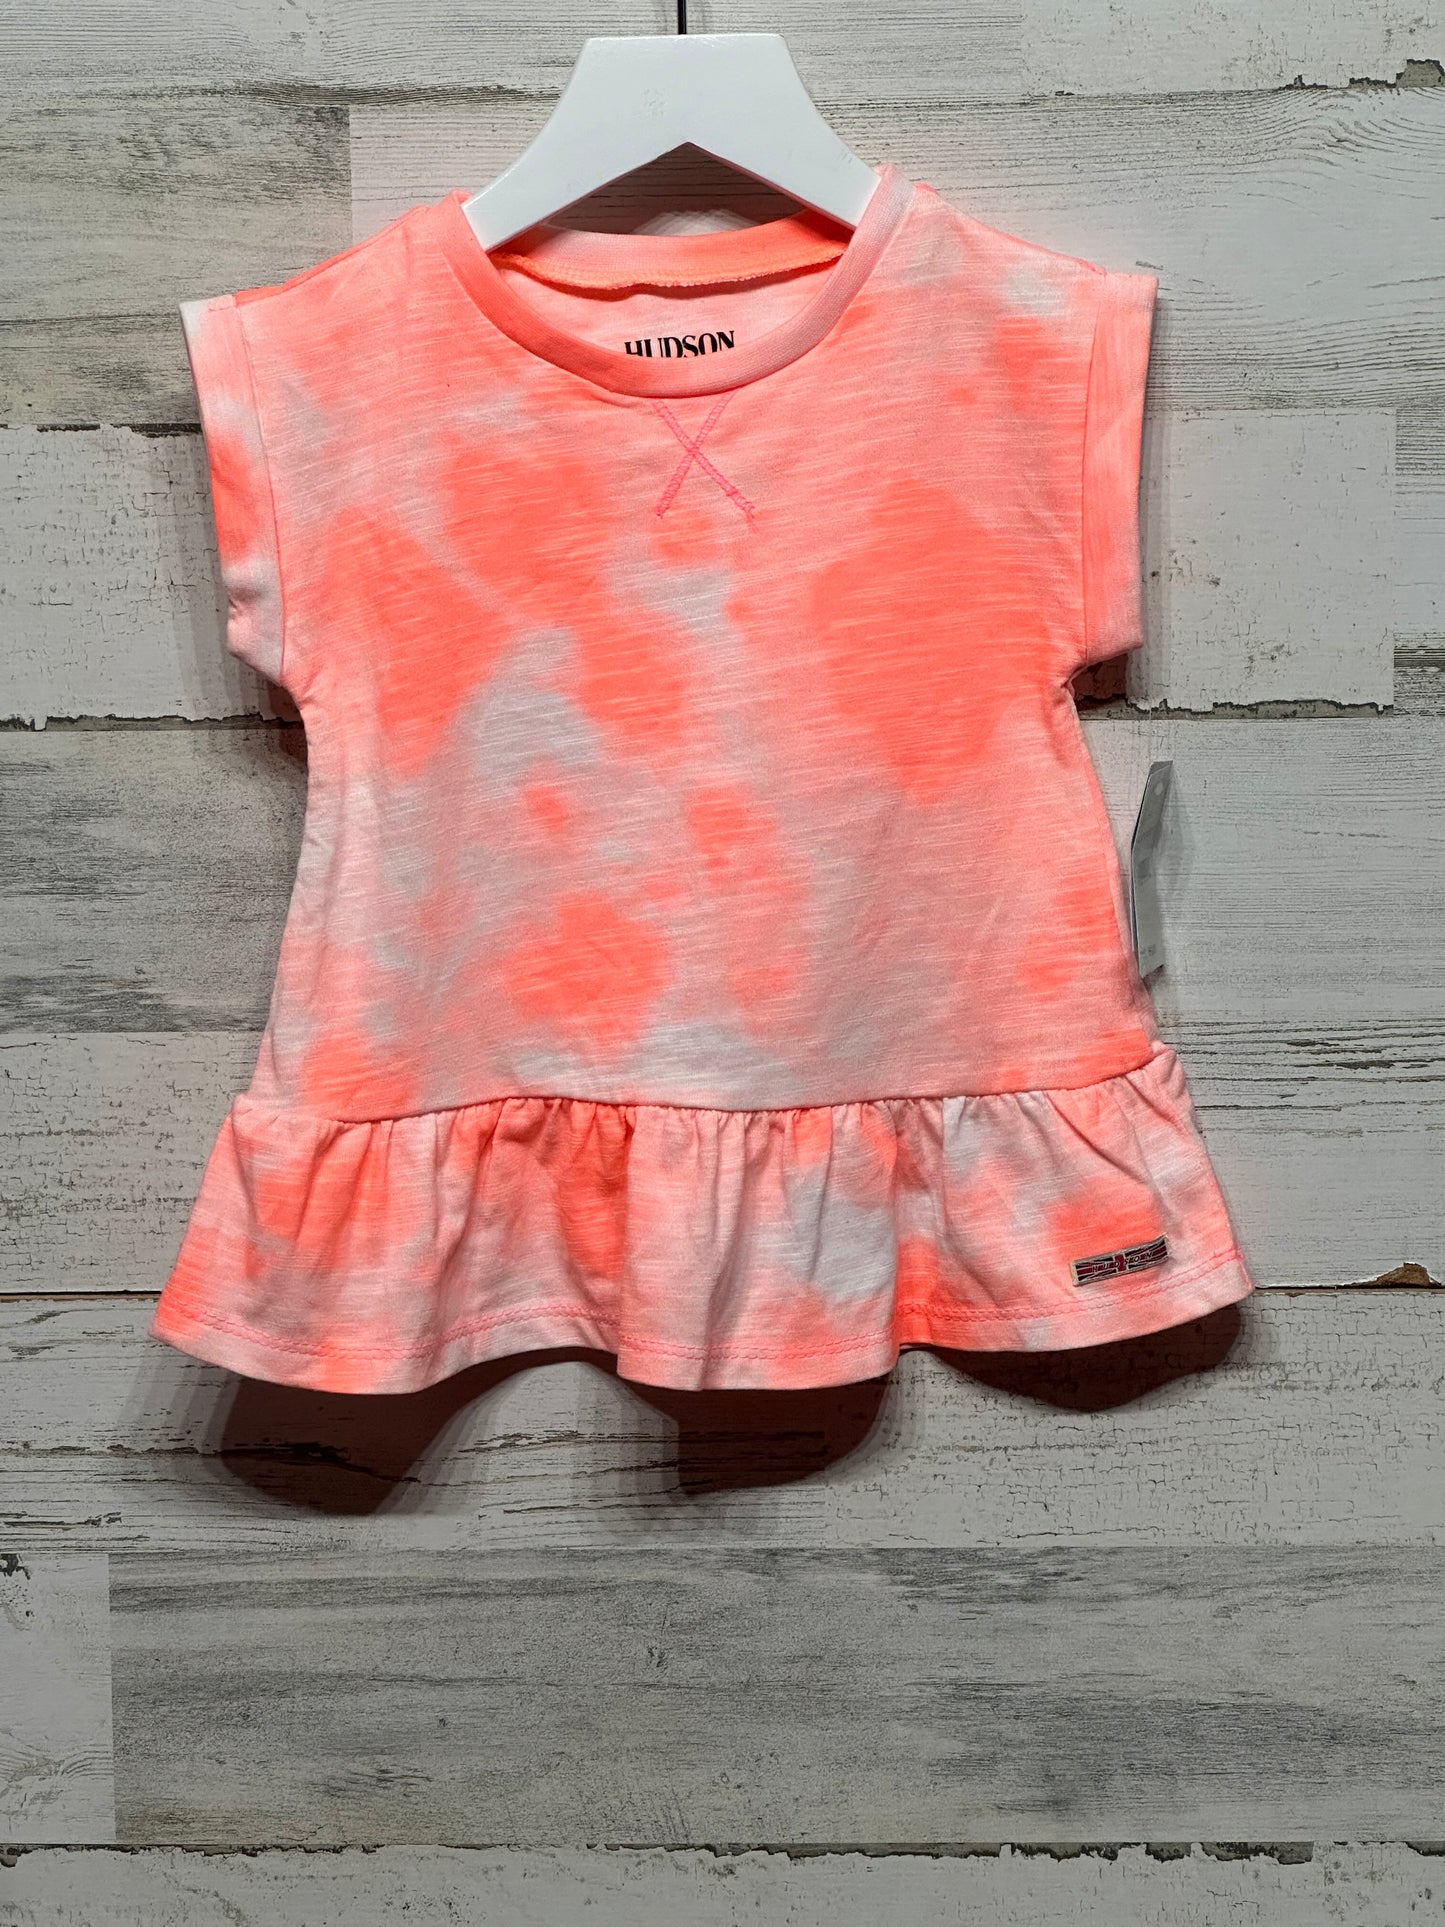 Girls Size 3t Hudson Bright Tie Dye Shirt - New With Tags